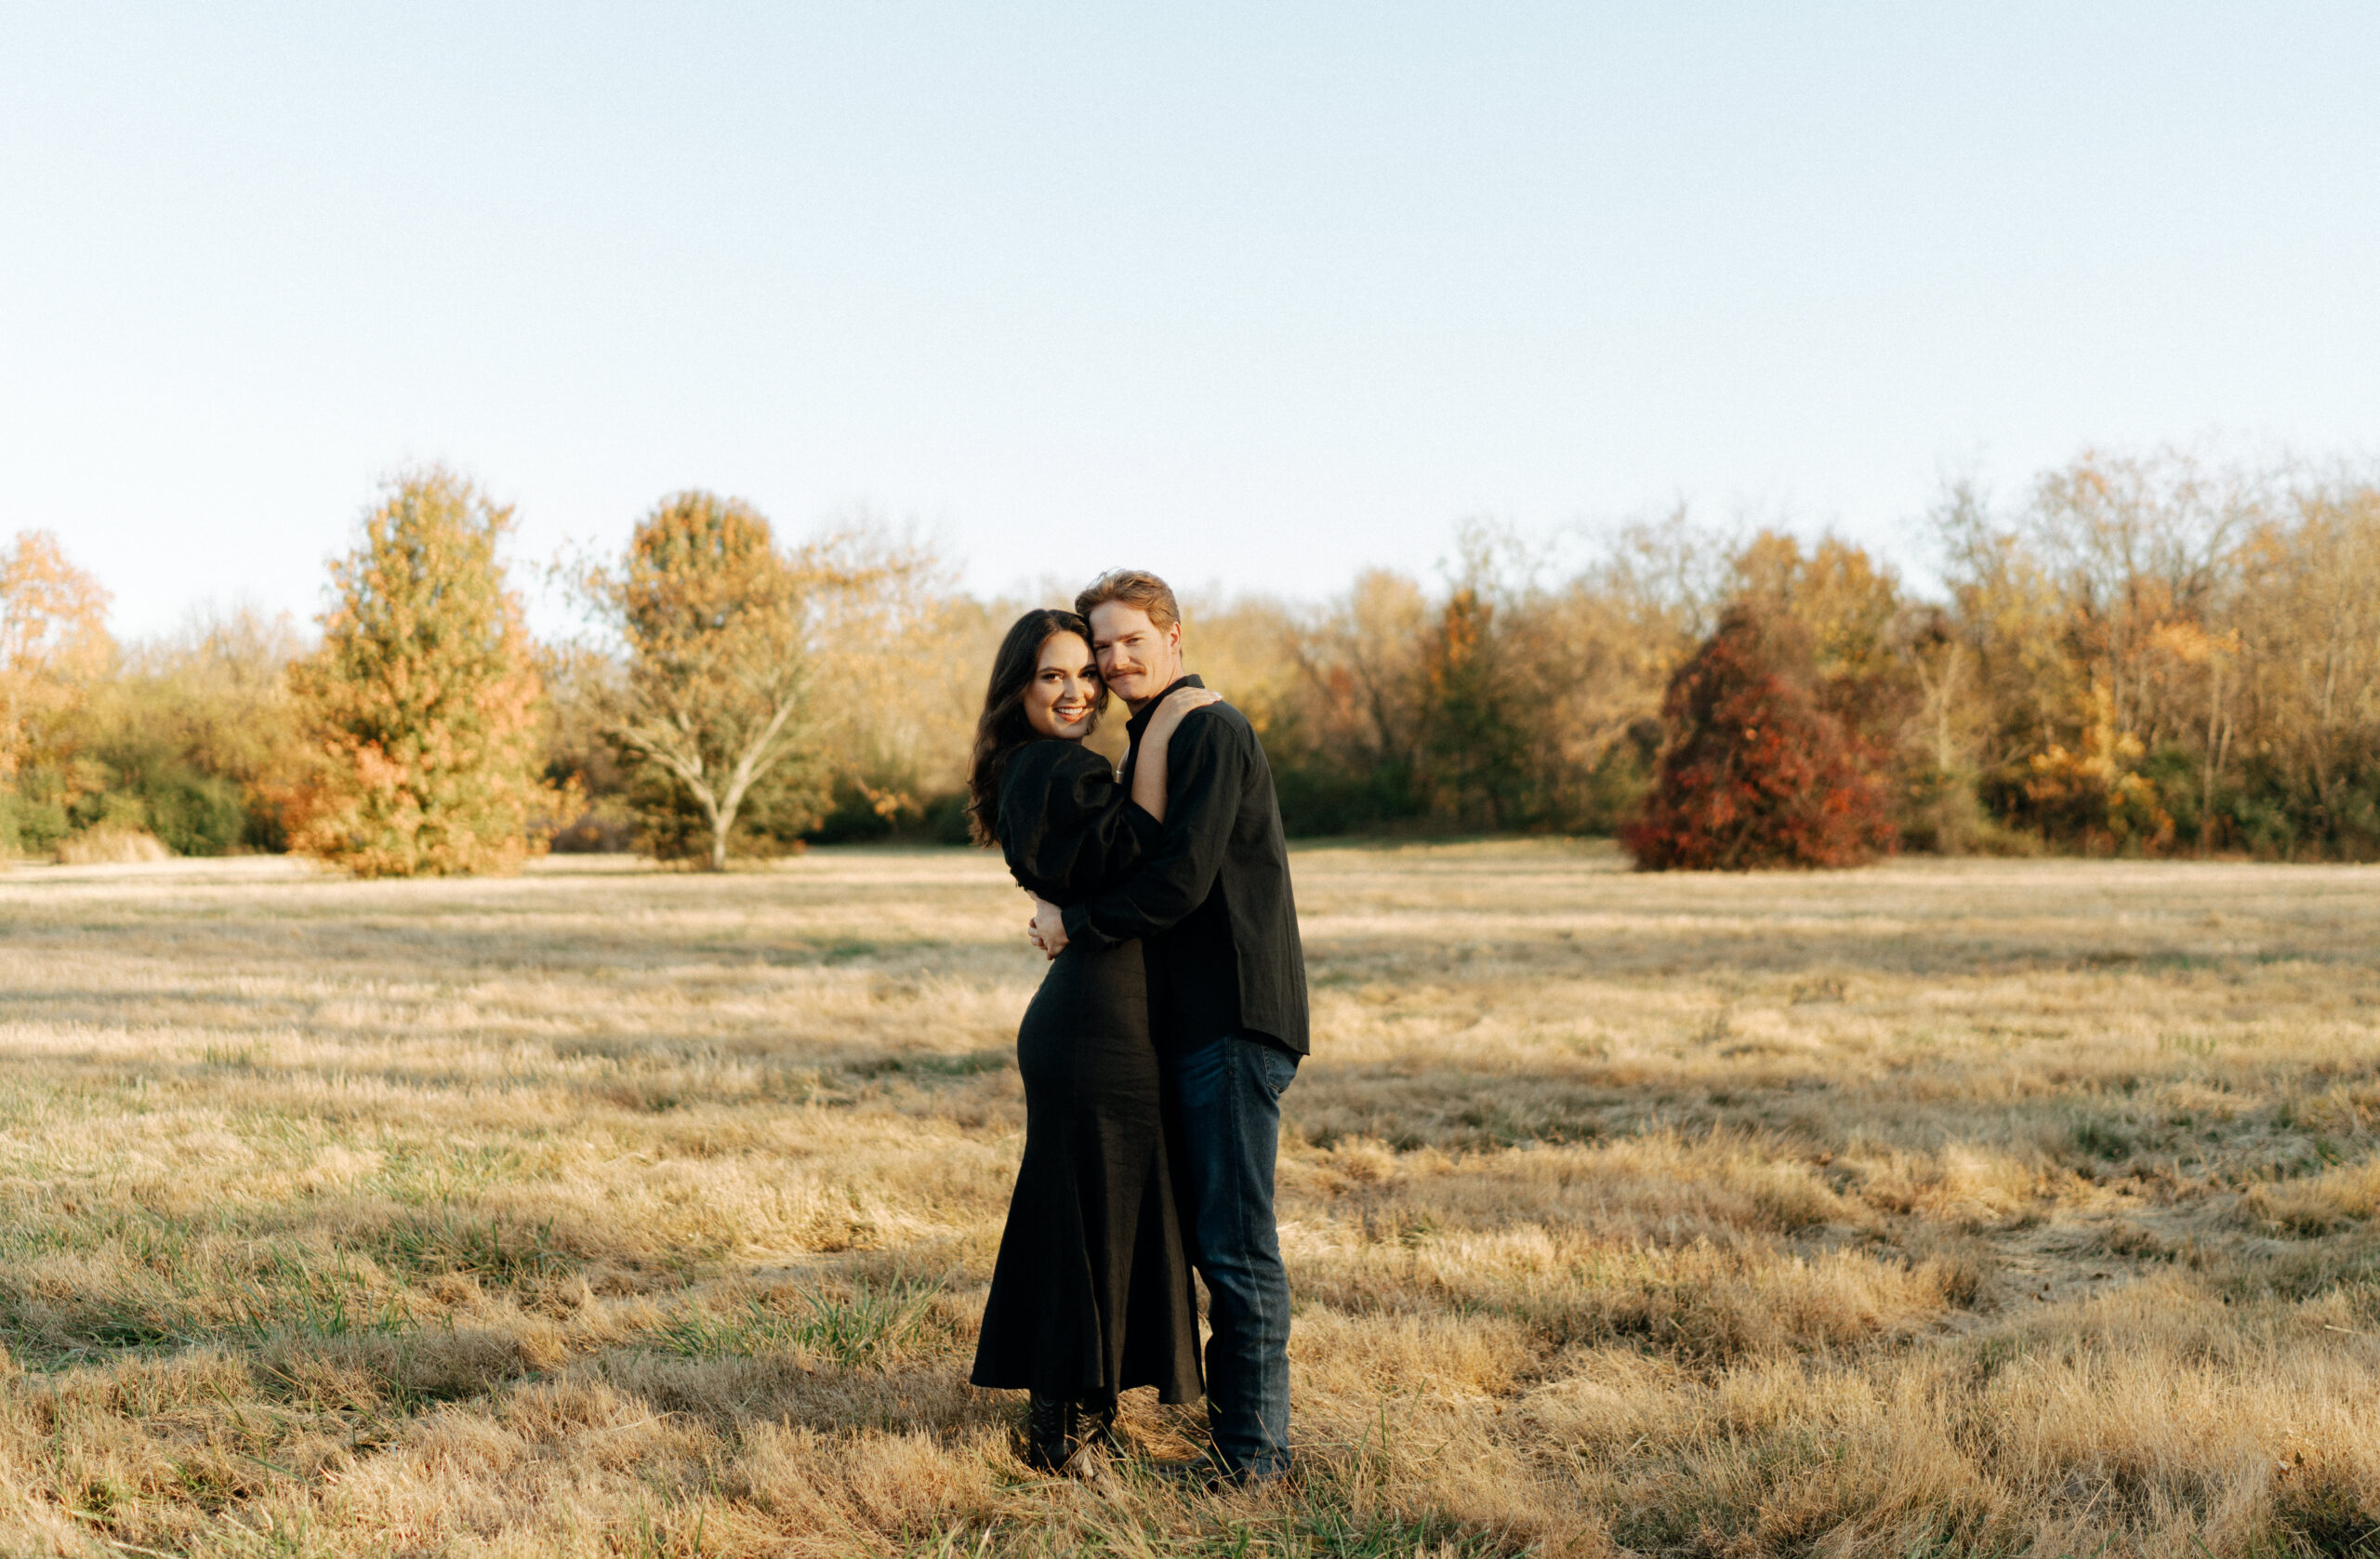 This is a couple taking pictures together for their engagement session in Franklin, TN!